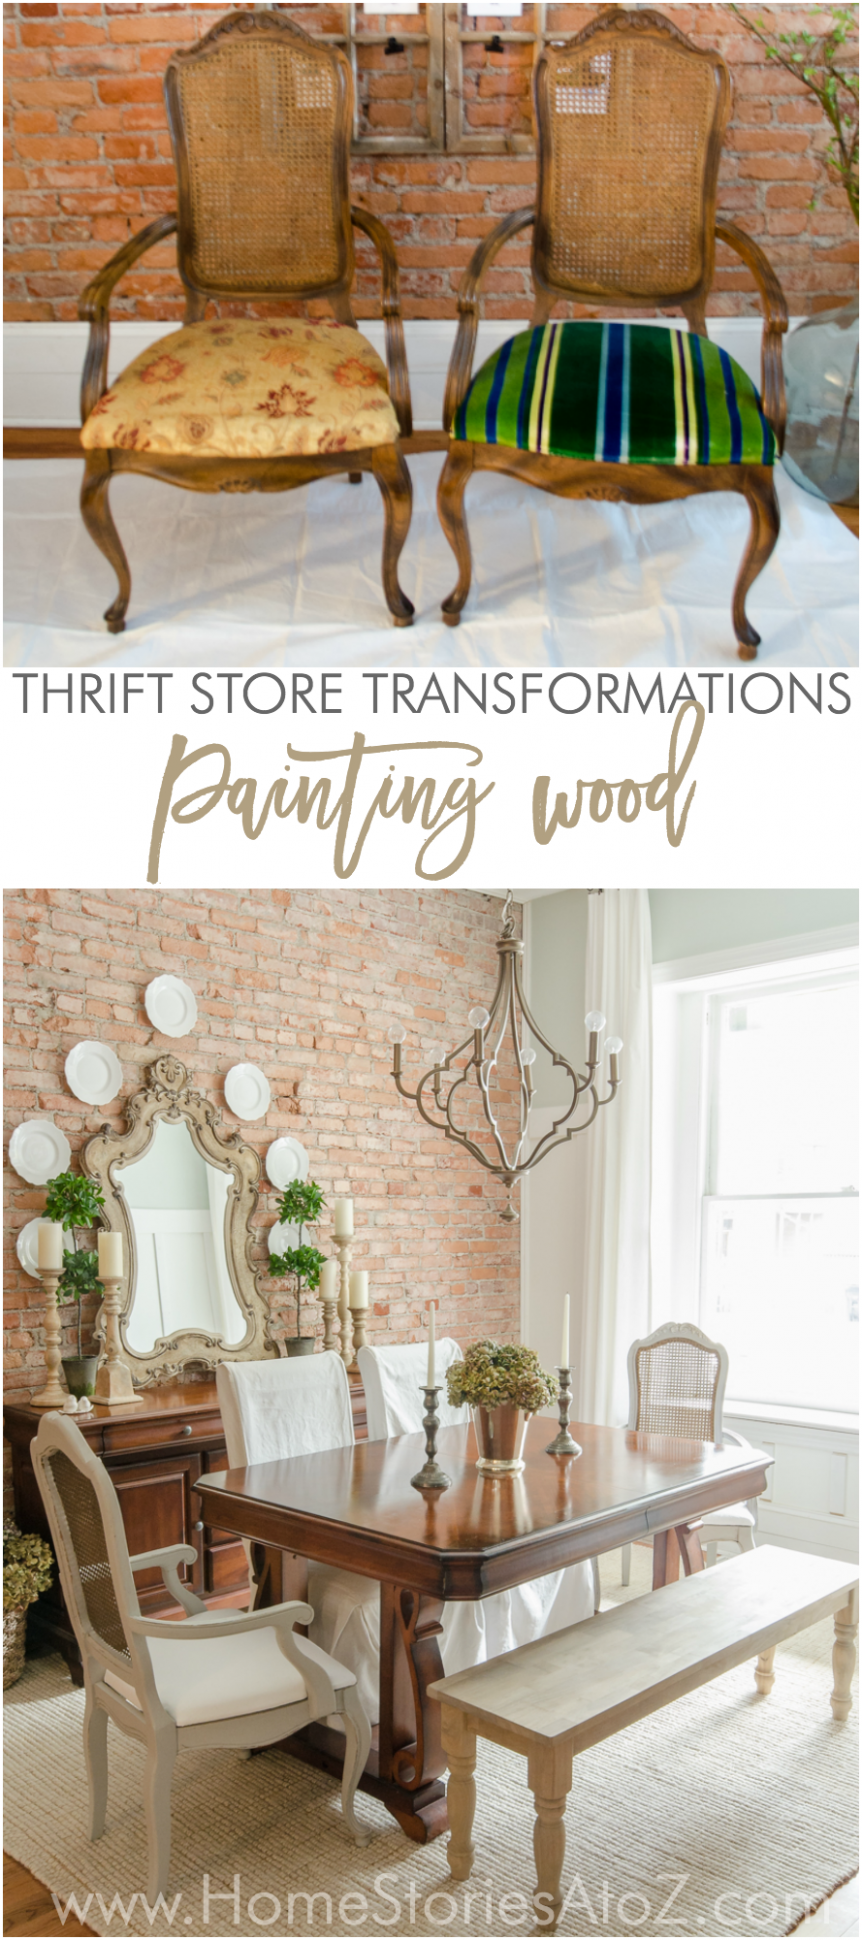 Thrifty Under $7: How To Paint Wood How To Paint Chalk Paint On Wood